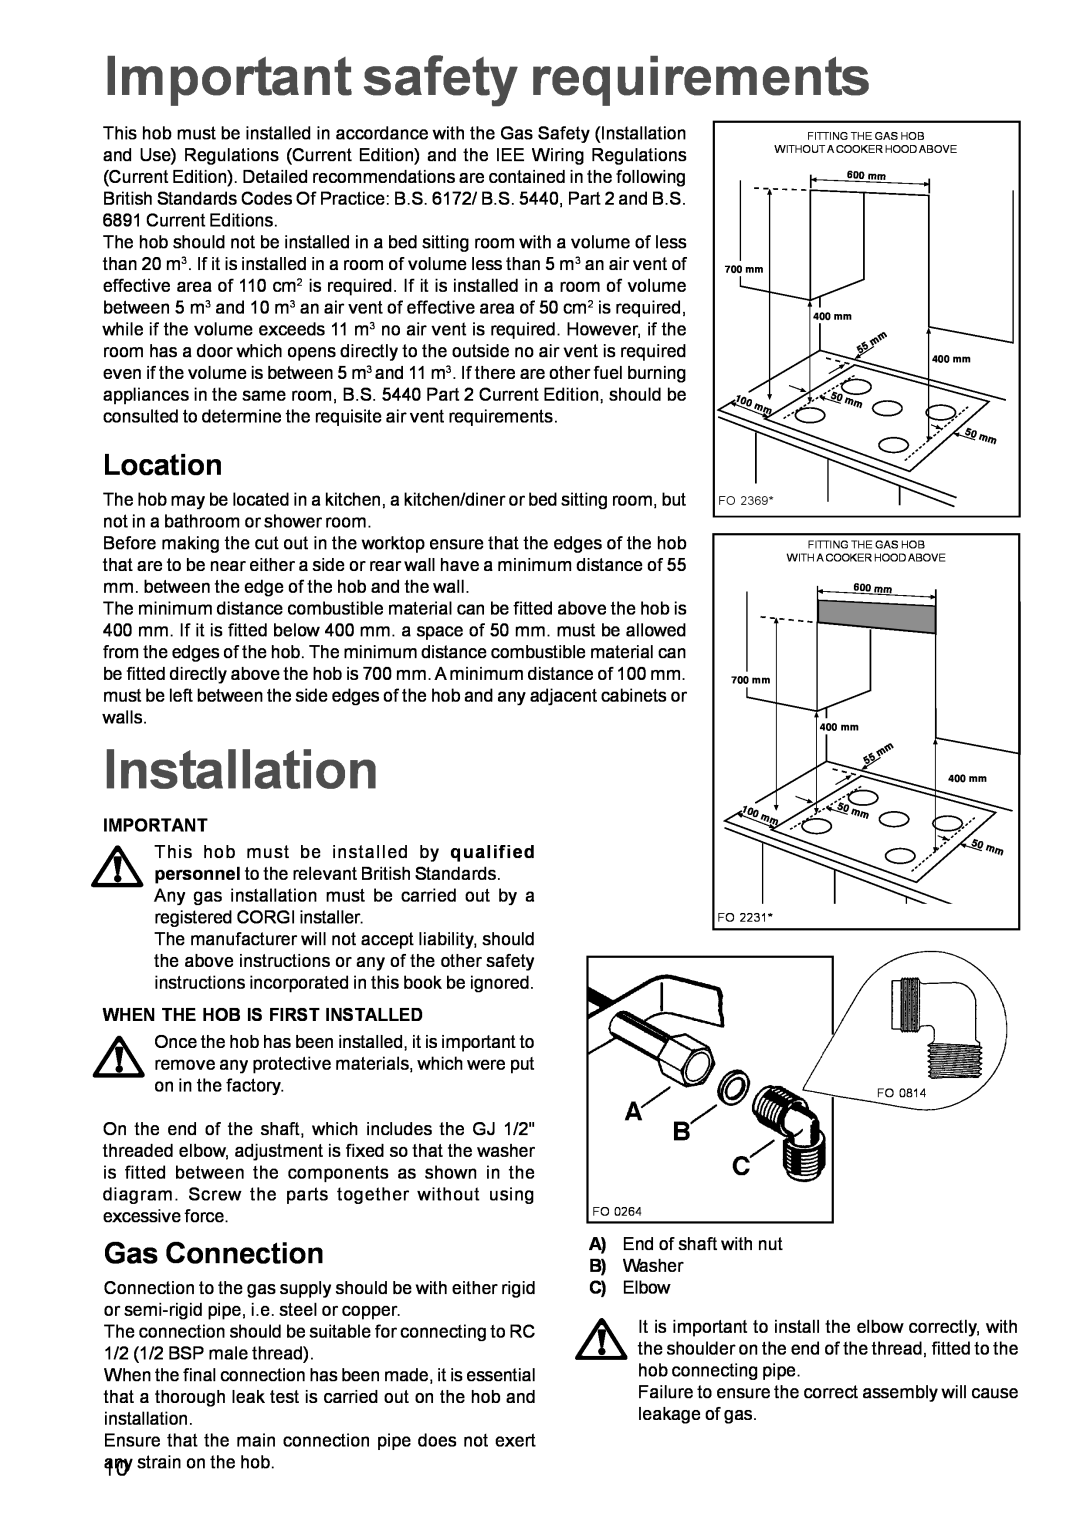 Zanussi ZGF982C manual Important safety requirements, Installation, Location, Gas Connection 